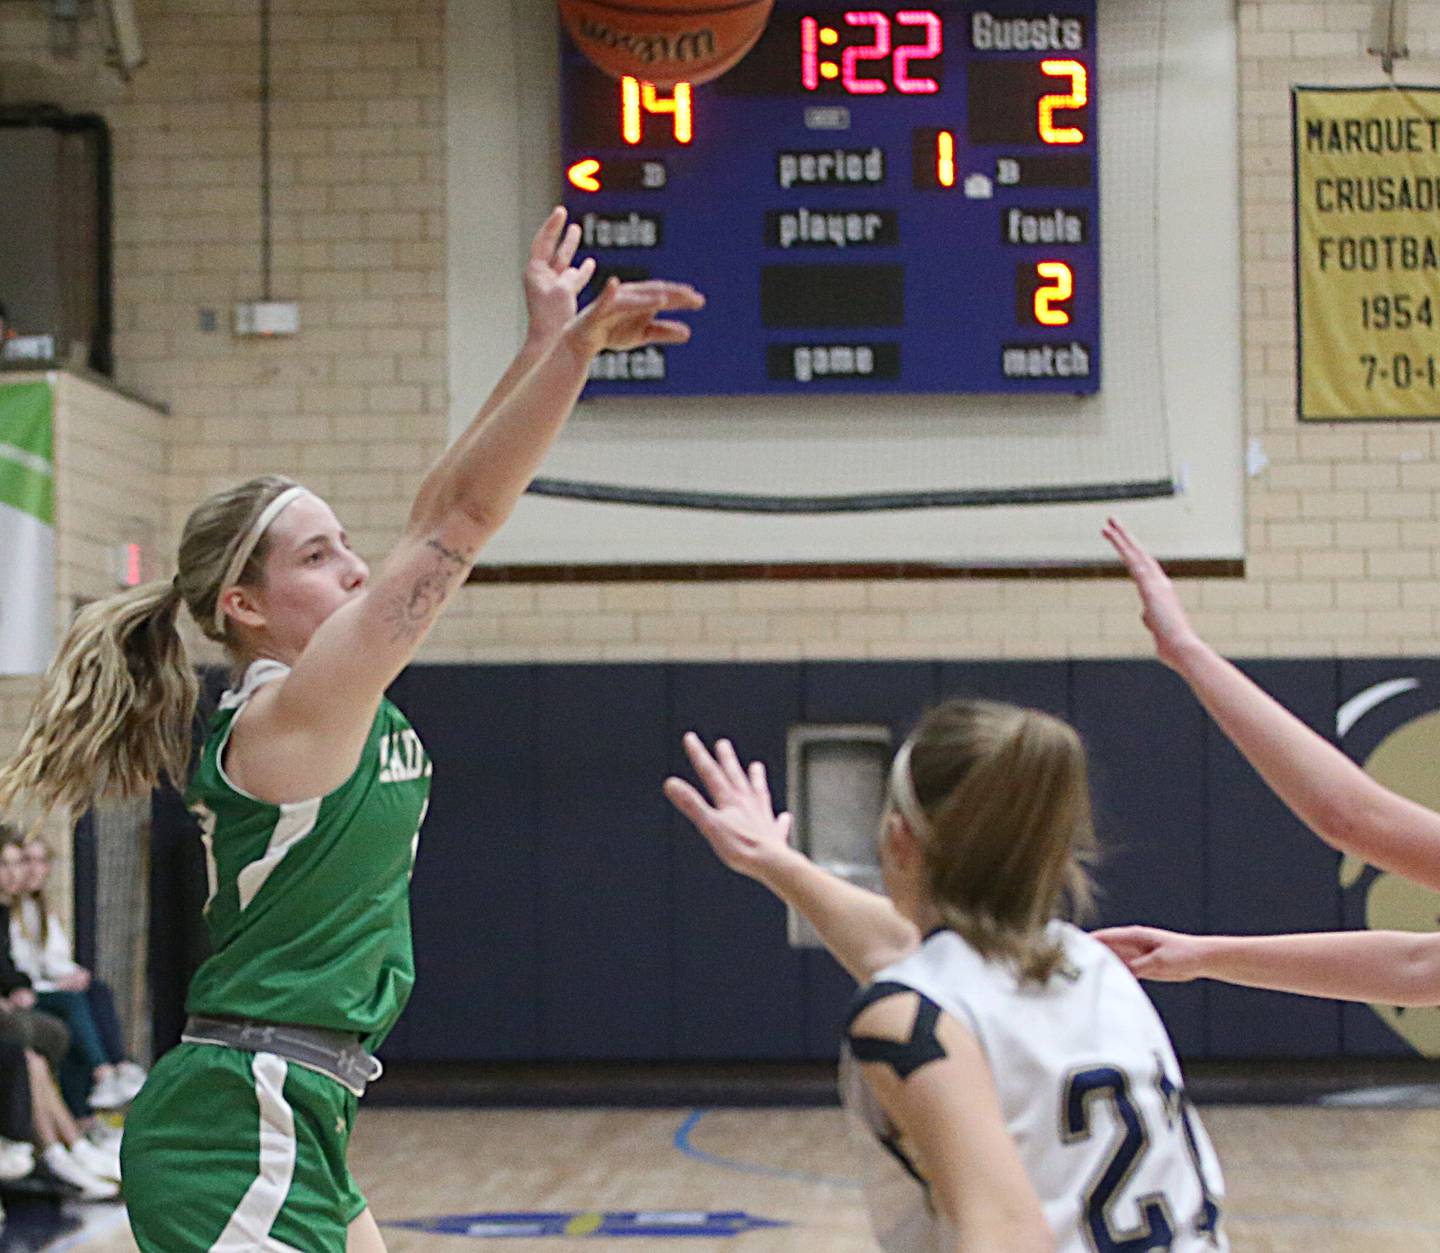 Seneca's Kennedy Hartwig shoots a jump shot over Marquette's Avery Durdan in Bader Gym on Monday, Jan. 23, 2023 at Marquette High School.